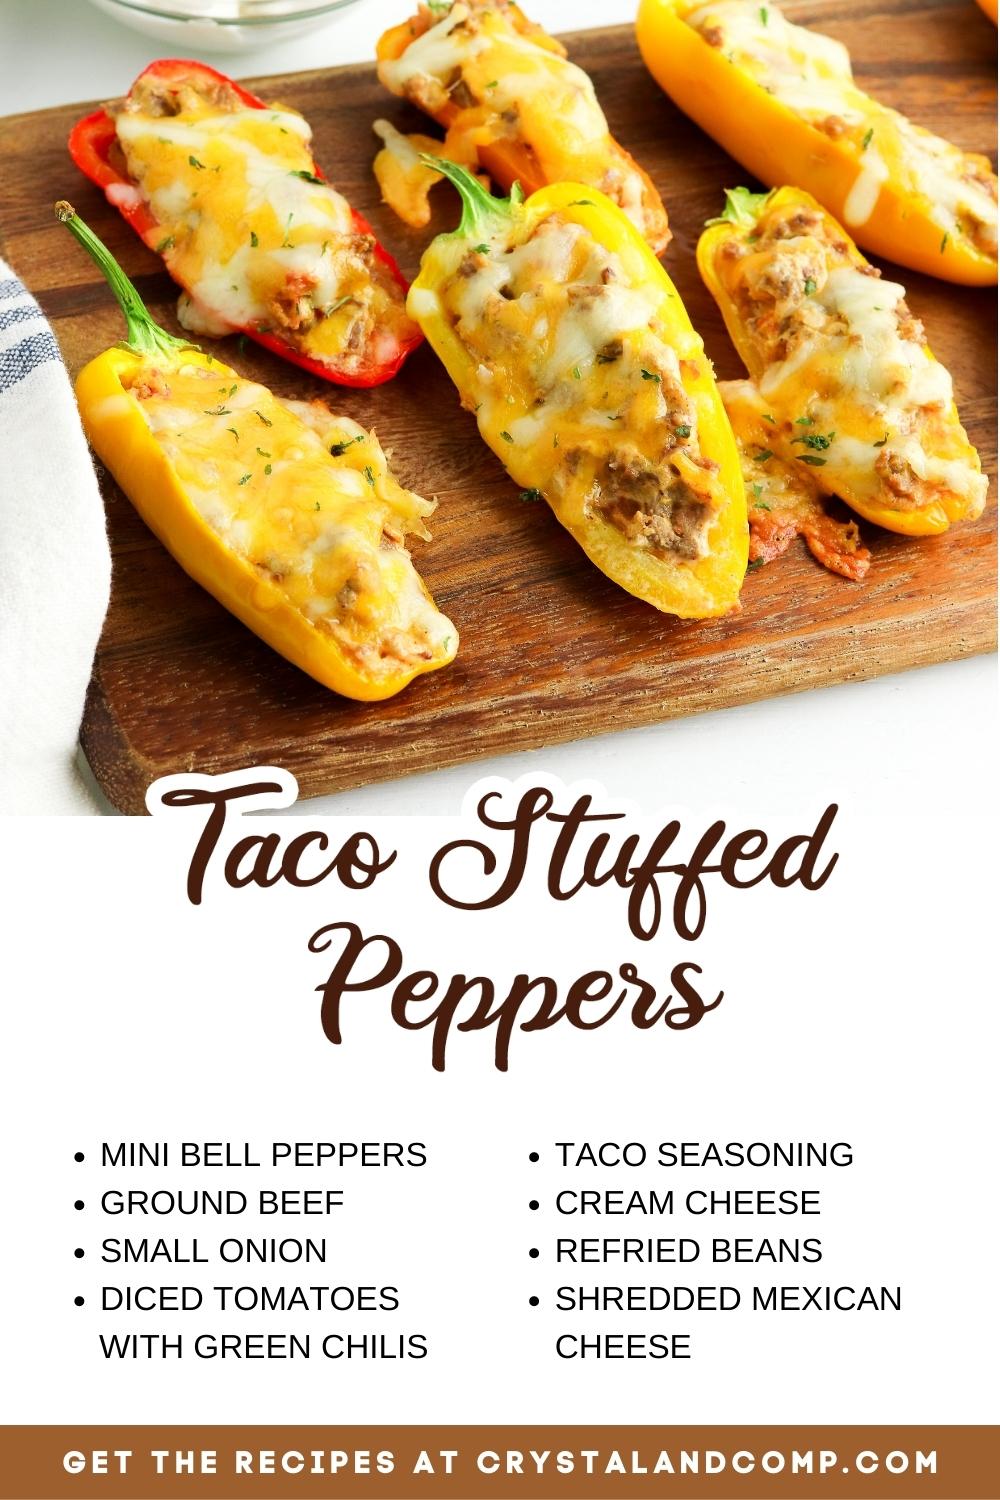 taco stuffed peppers ingredient list